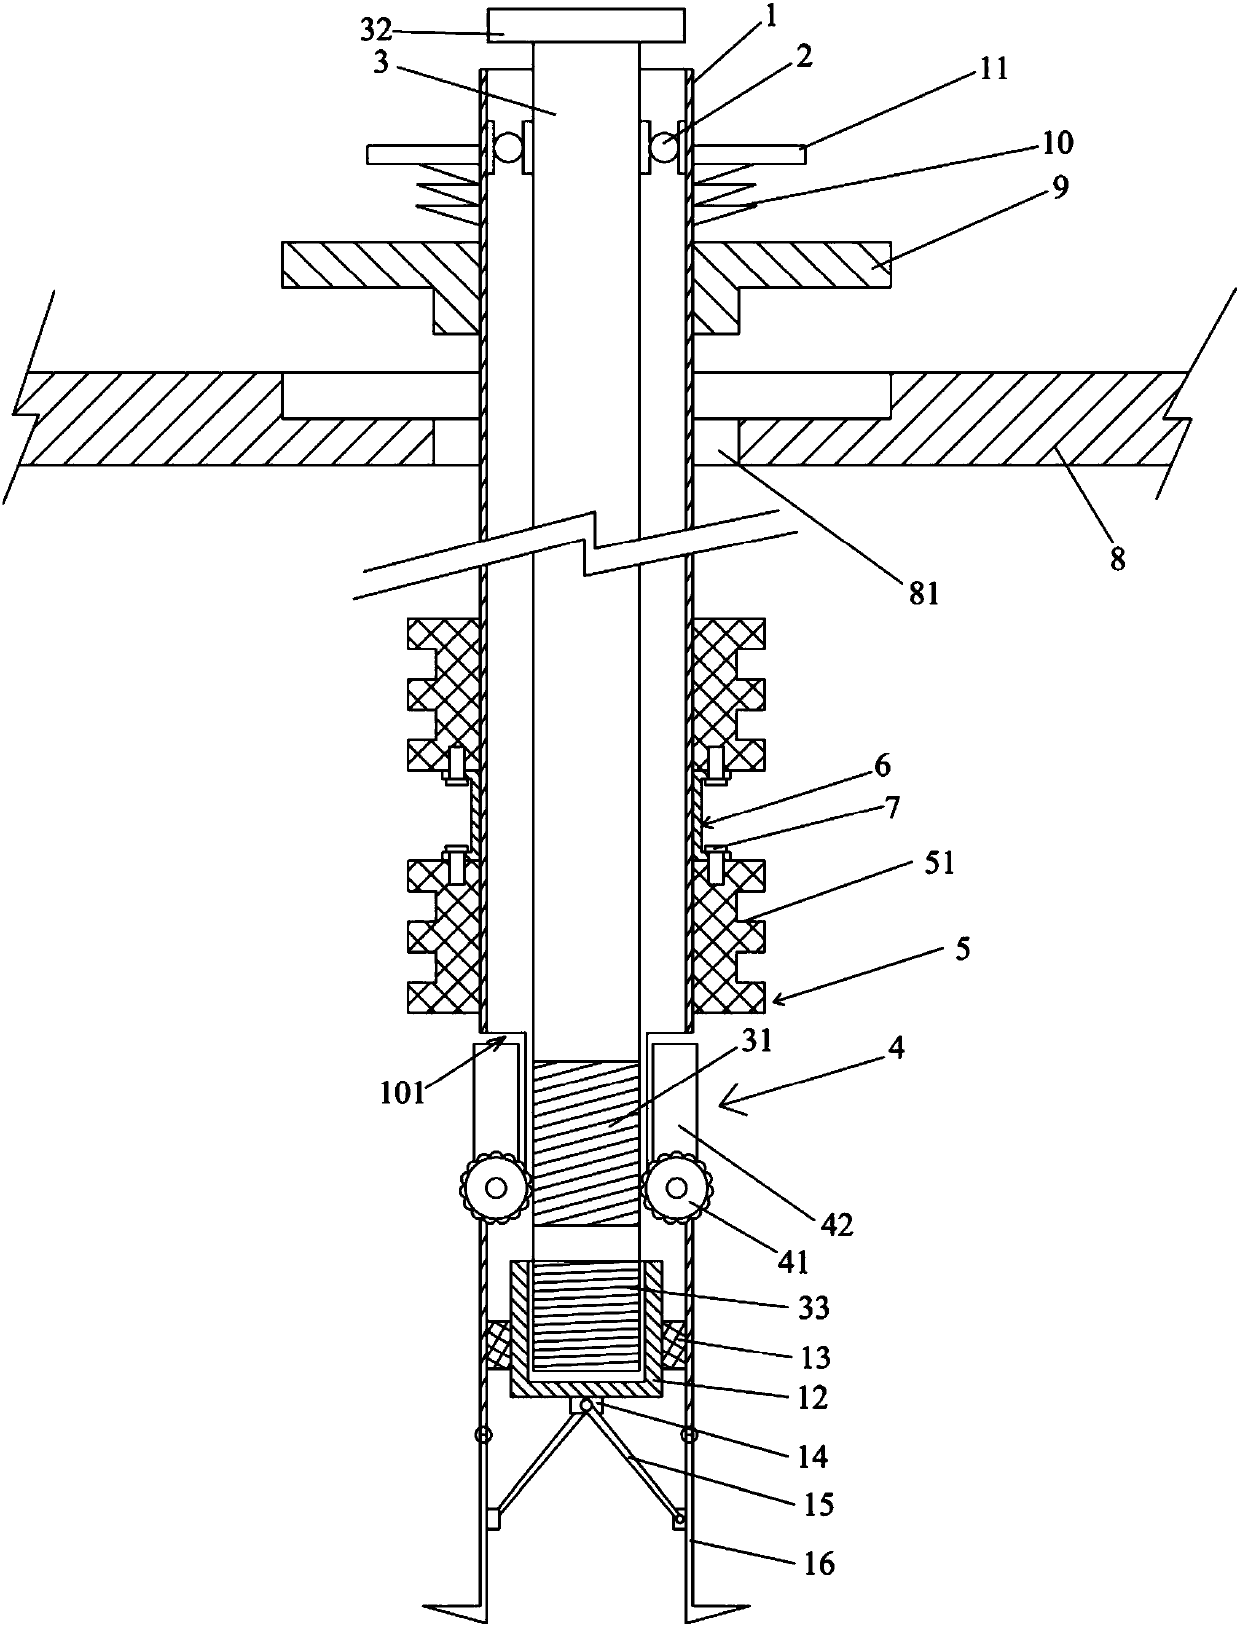 A slope strengthening device for building municipal civil engineering